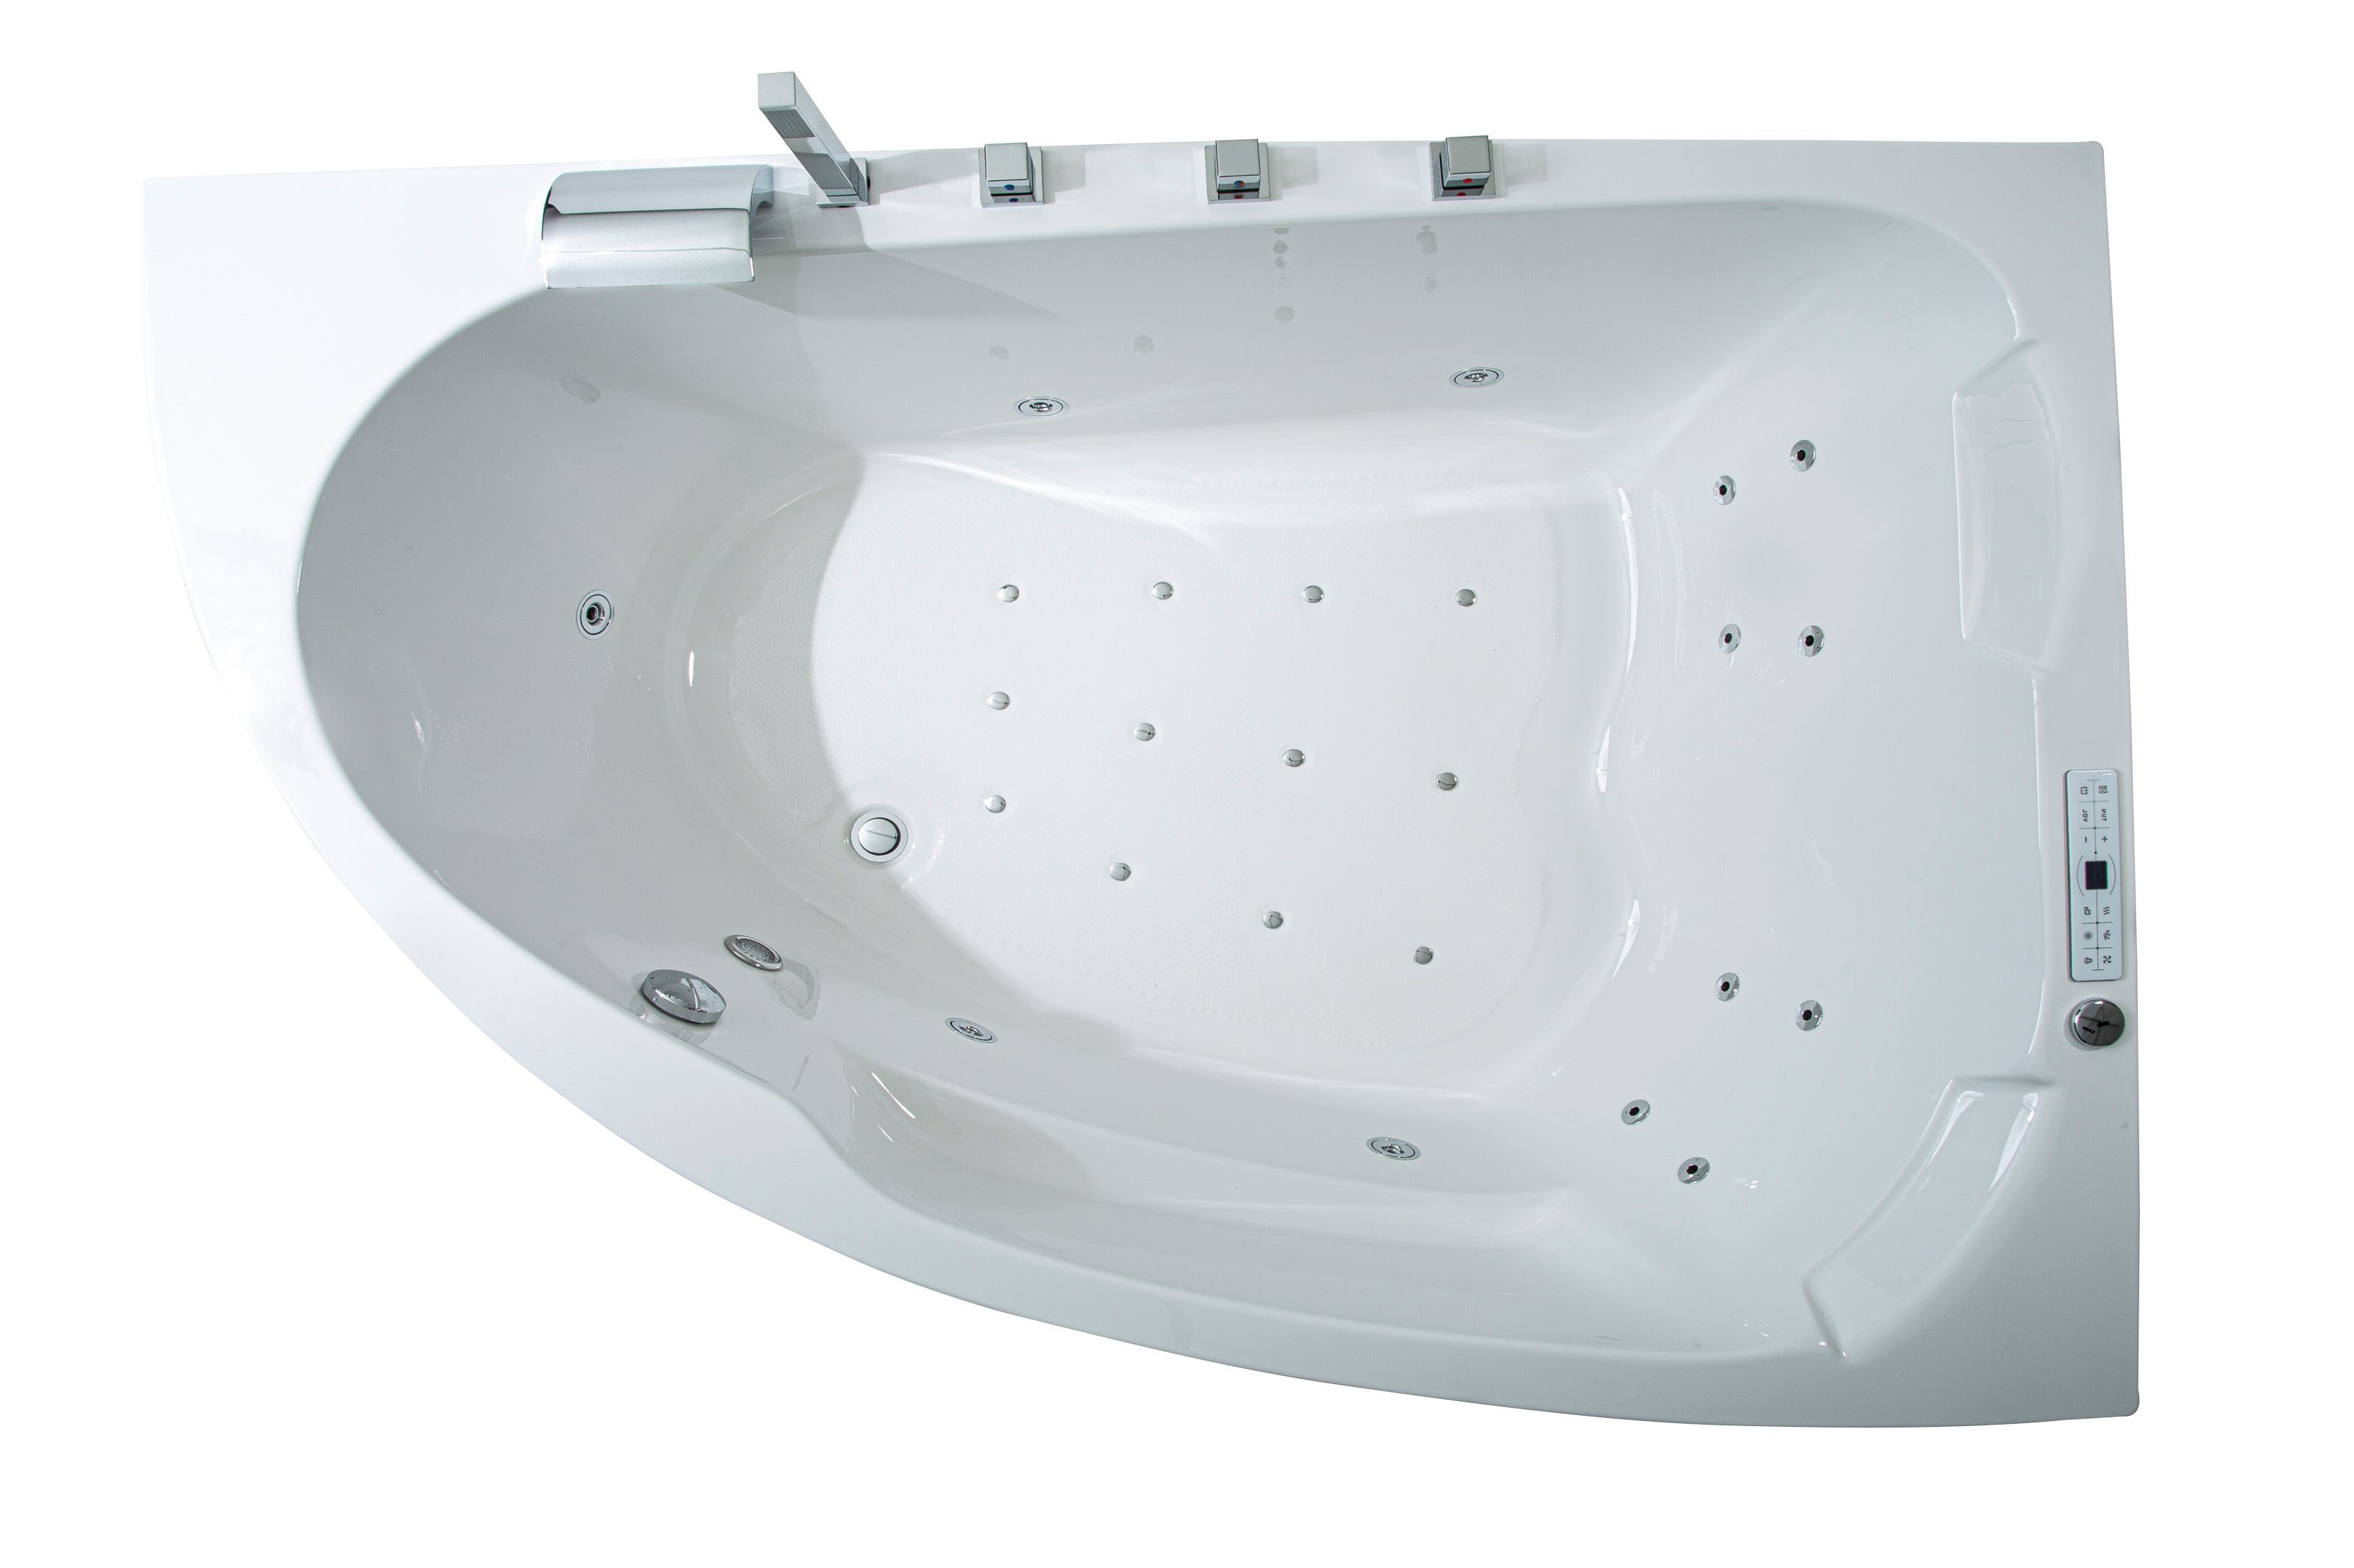 Baignoire d'angle Whirlpool Spa Bali Tulamben TWO droite 180x130 cm blanc MADE IN GERMANY